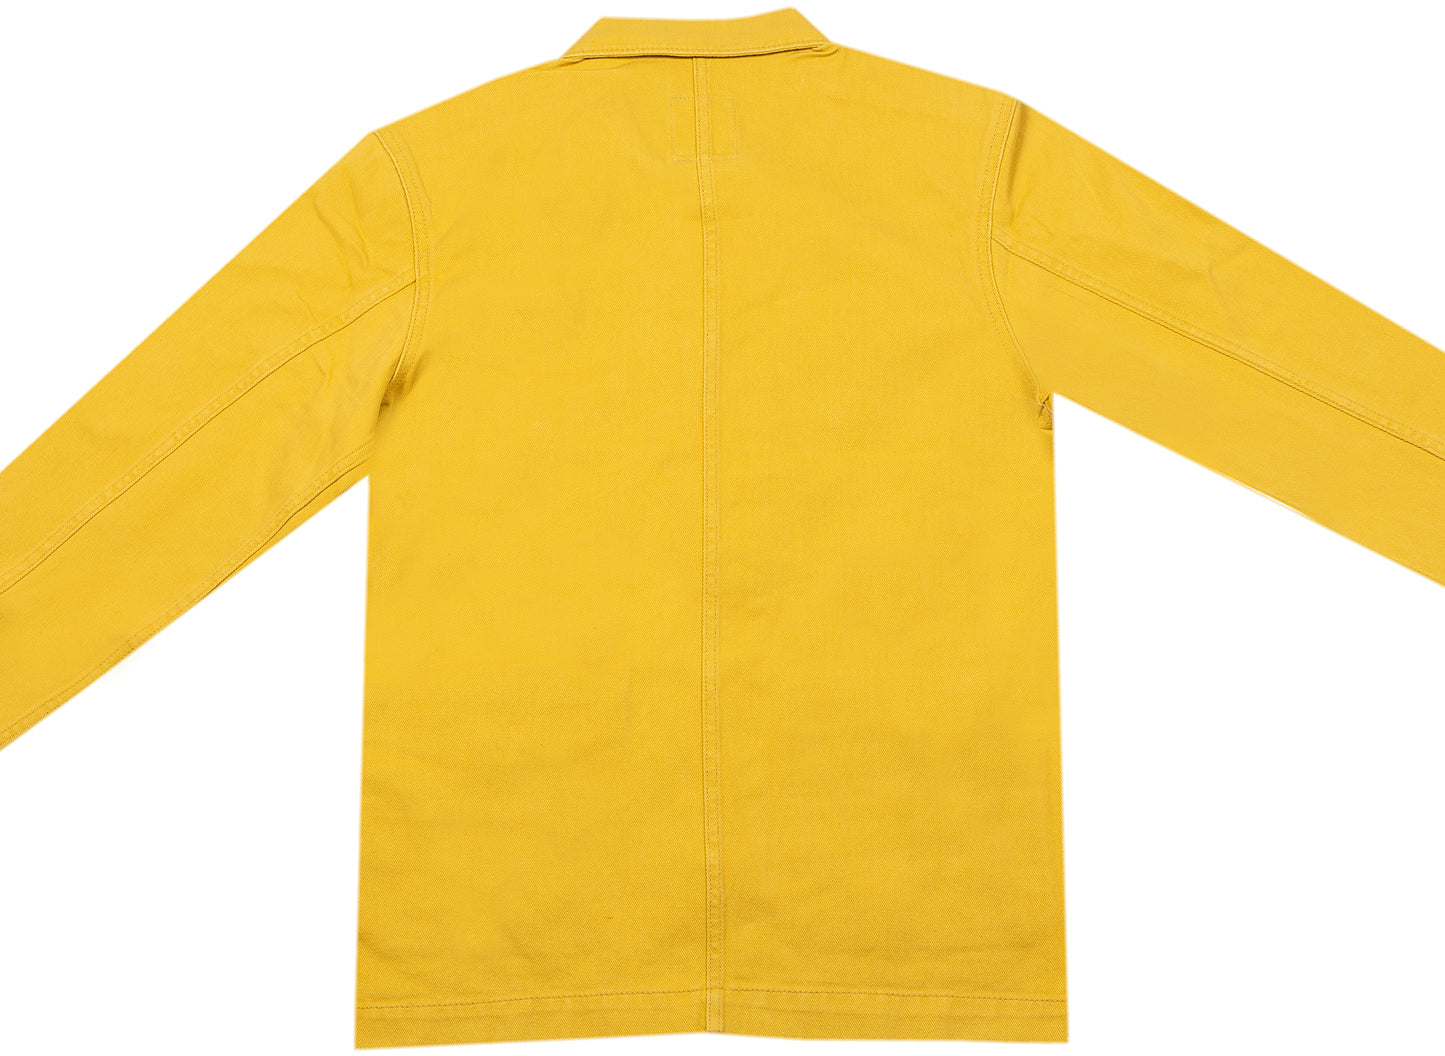 The Hundreds x Lee Jeans Chore Jacket in Yellow